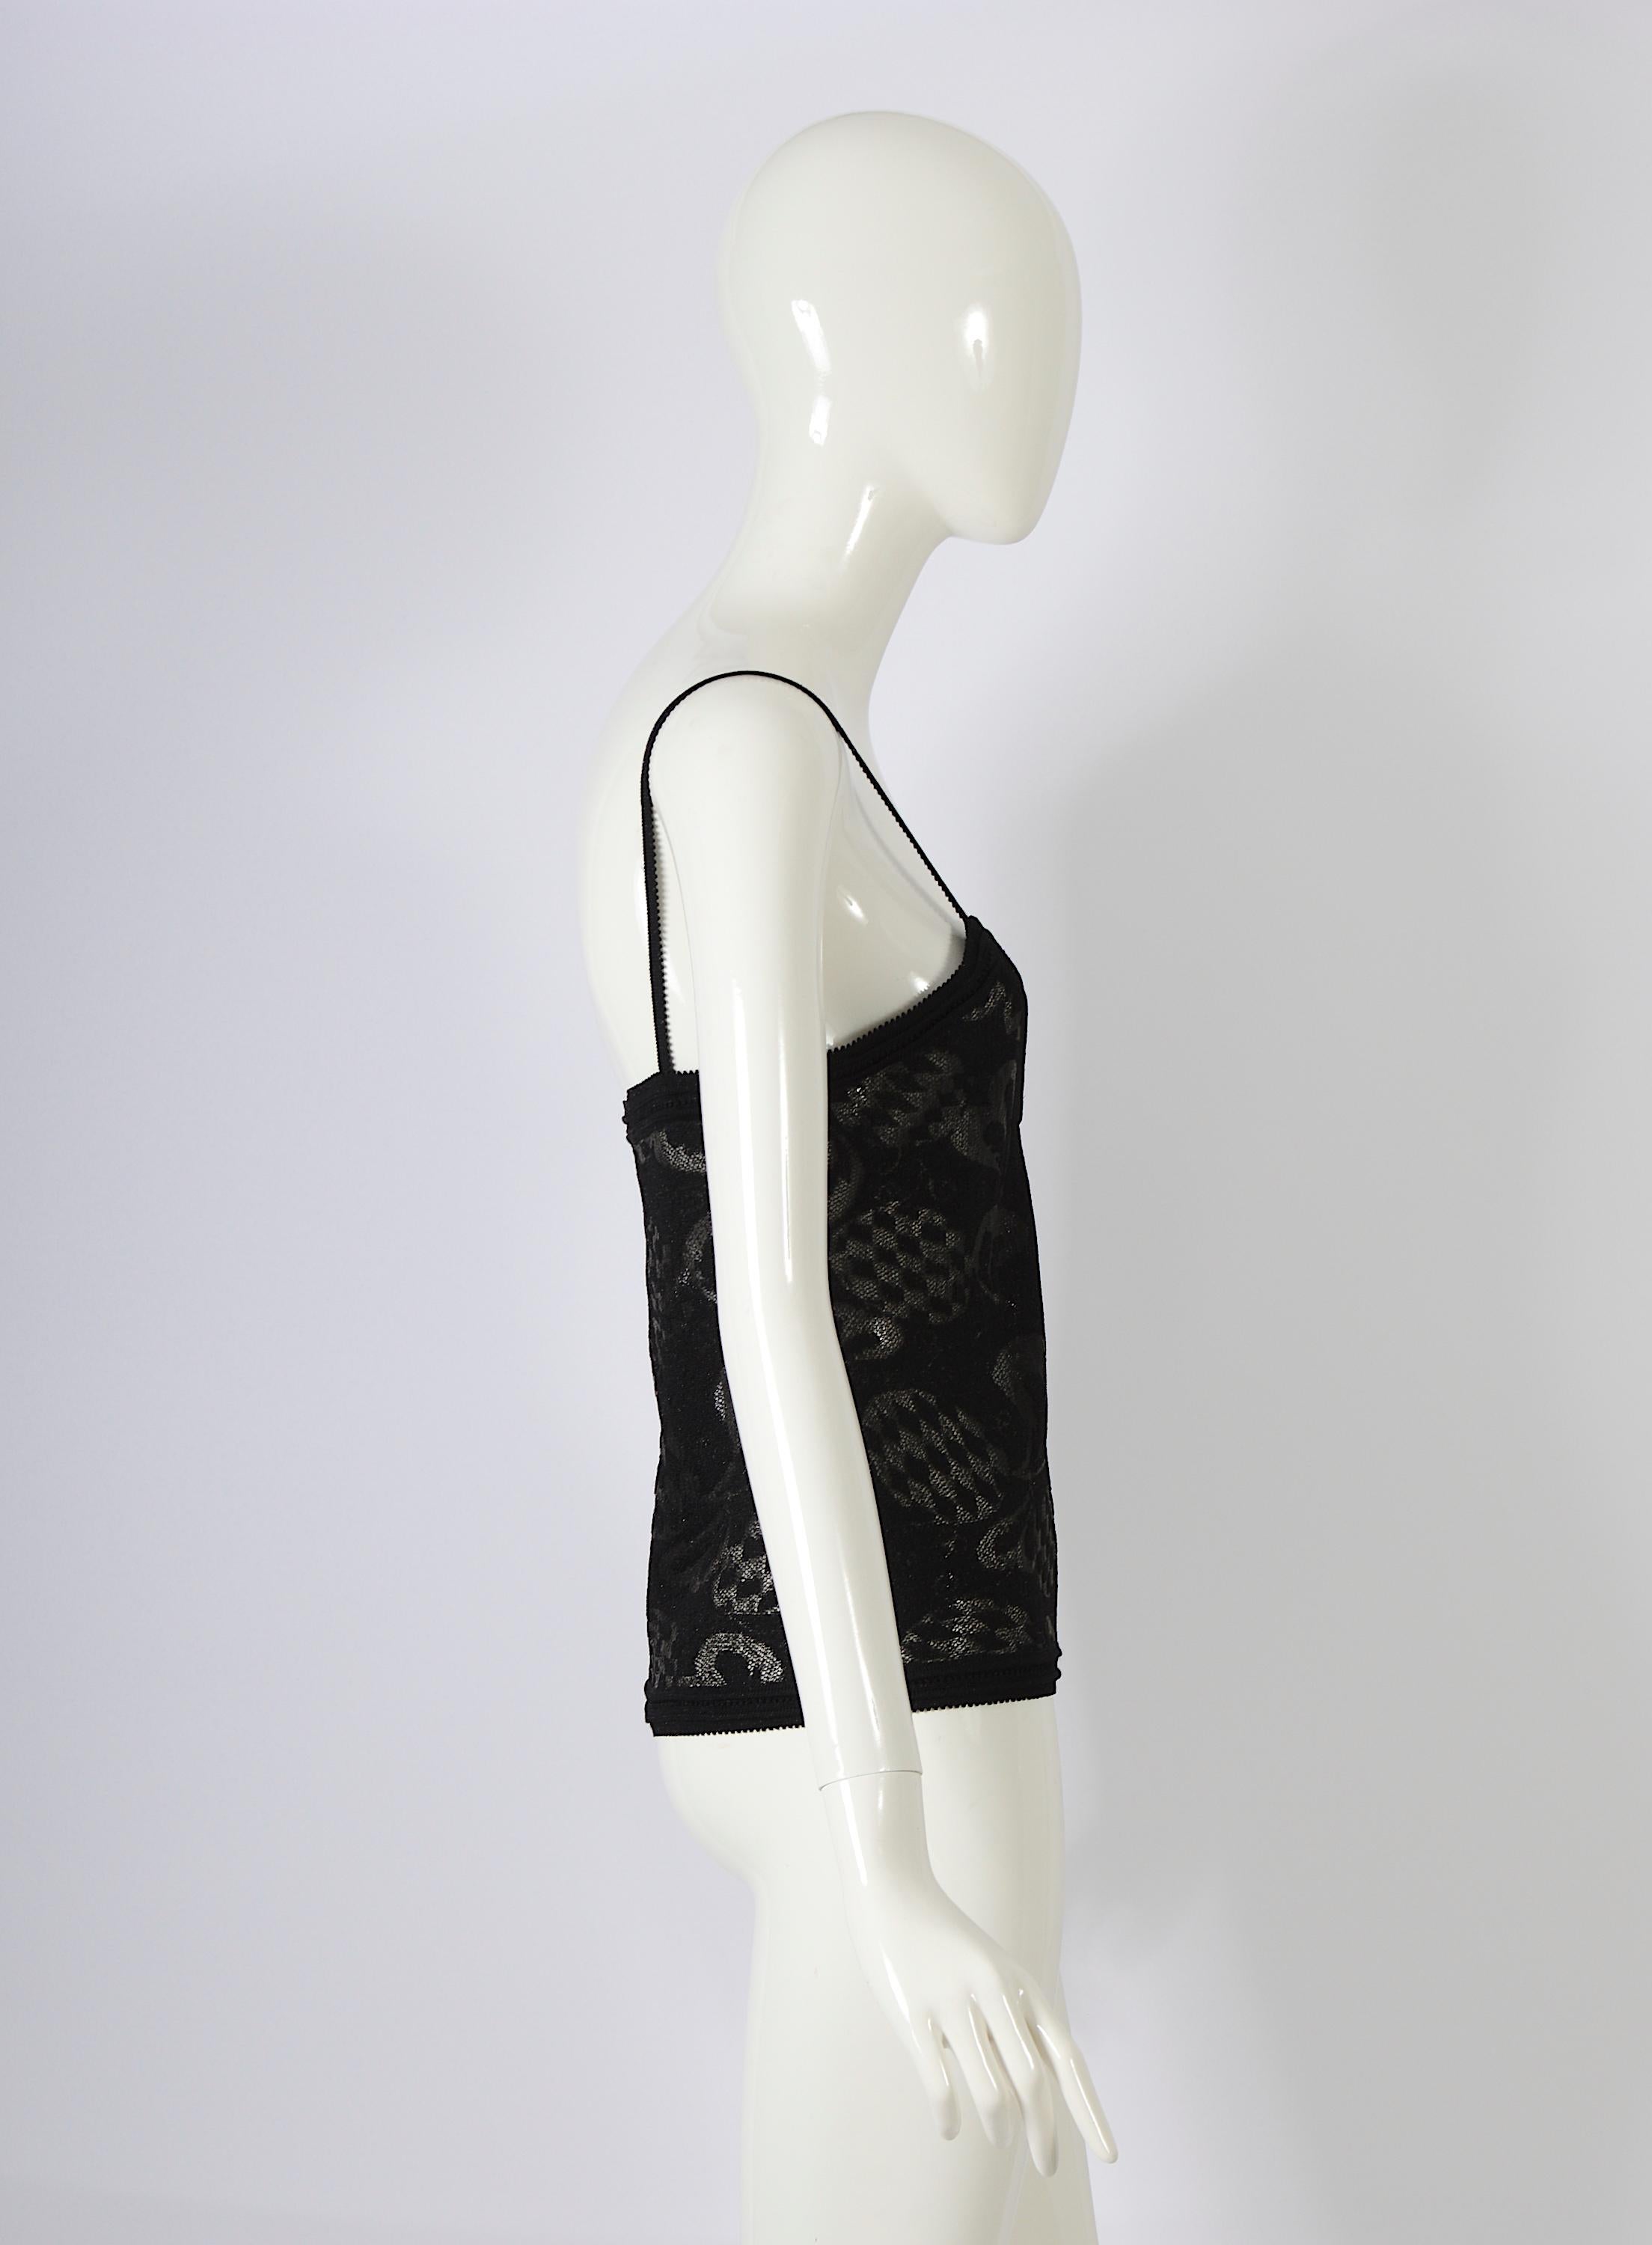 This elegant black lurex top embodies the timeless charm of a classic John Galliano design. Featuring spaghetti straps and a flattering fit, it exudes sophistication. The jacquard pattern subtly nods to historical influences, adding a touch of